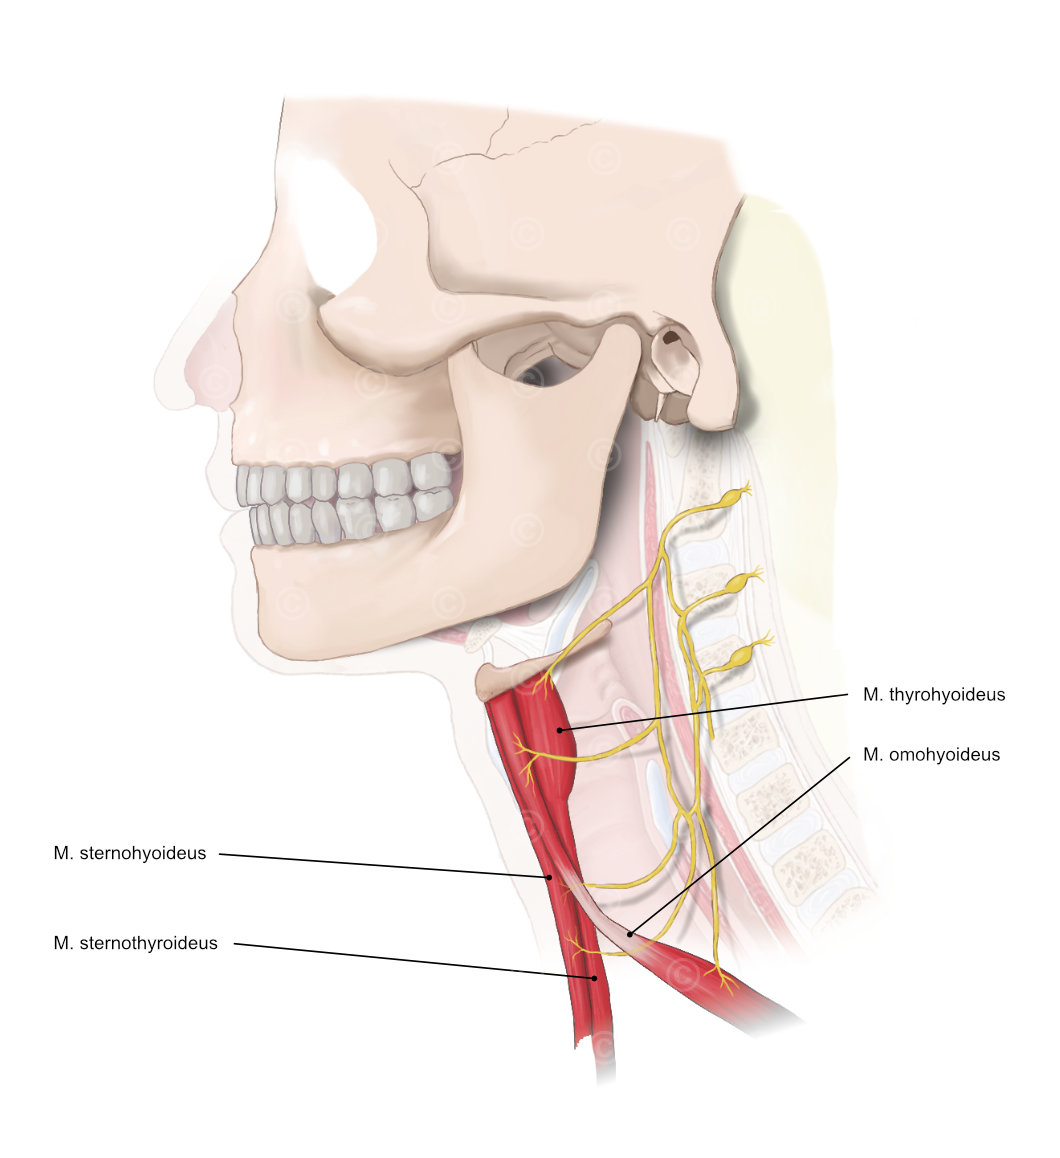 spinal nerves c1 c2 c3 innervated muscles